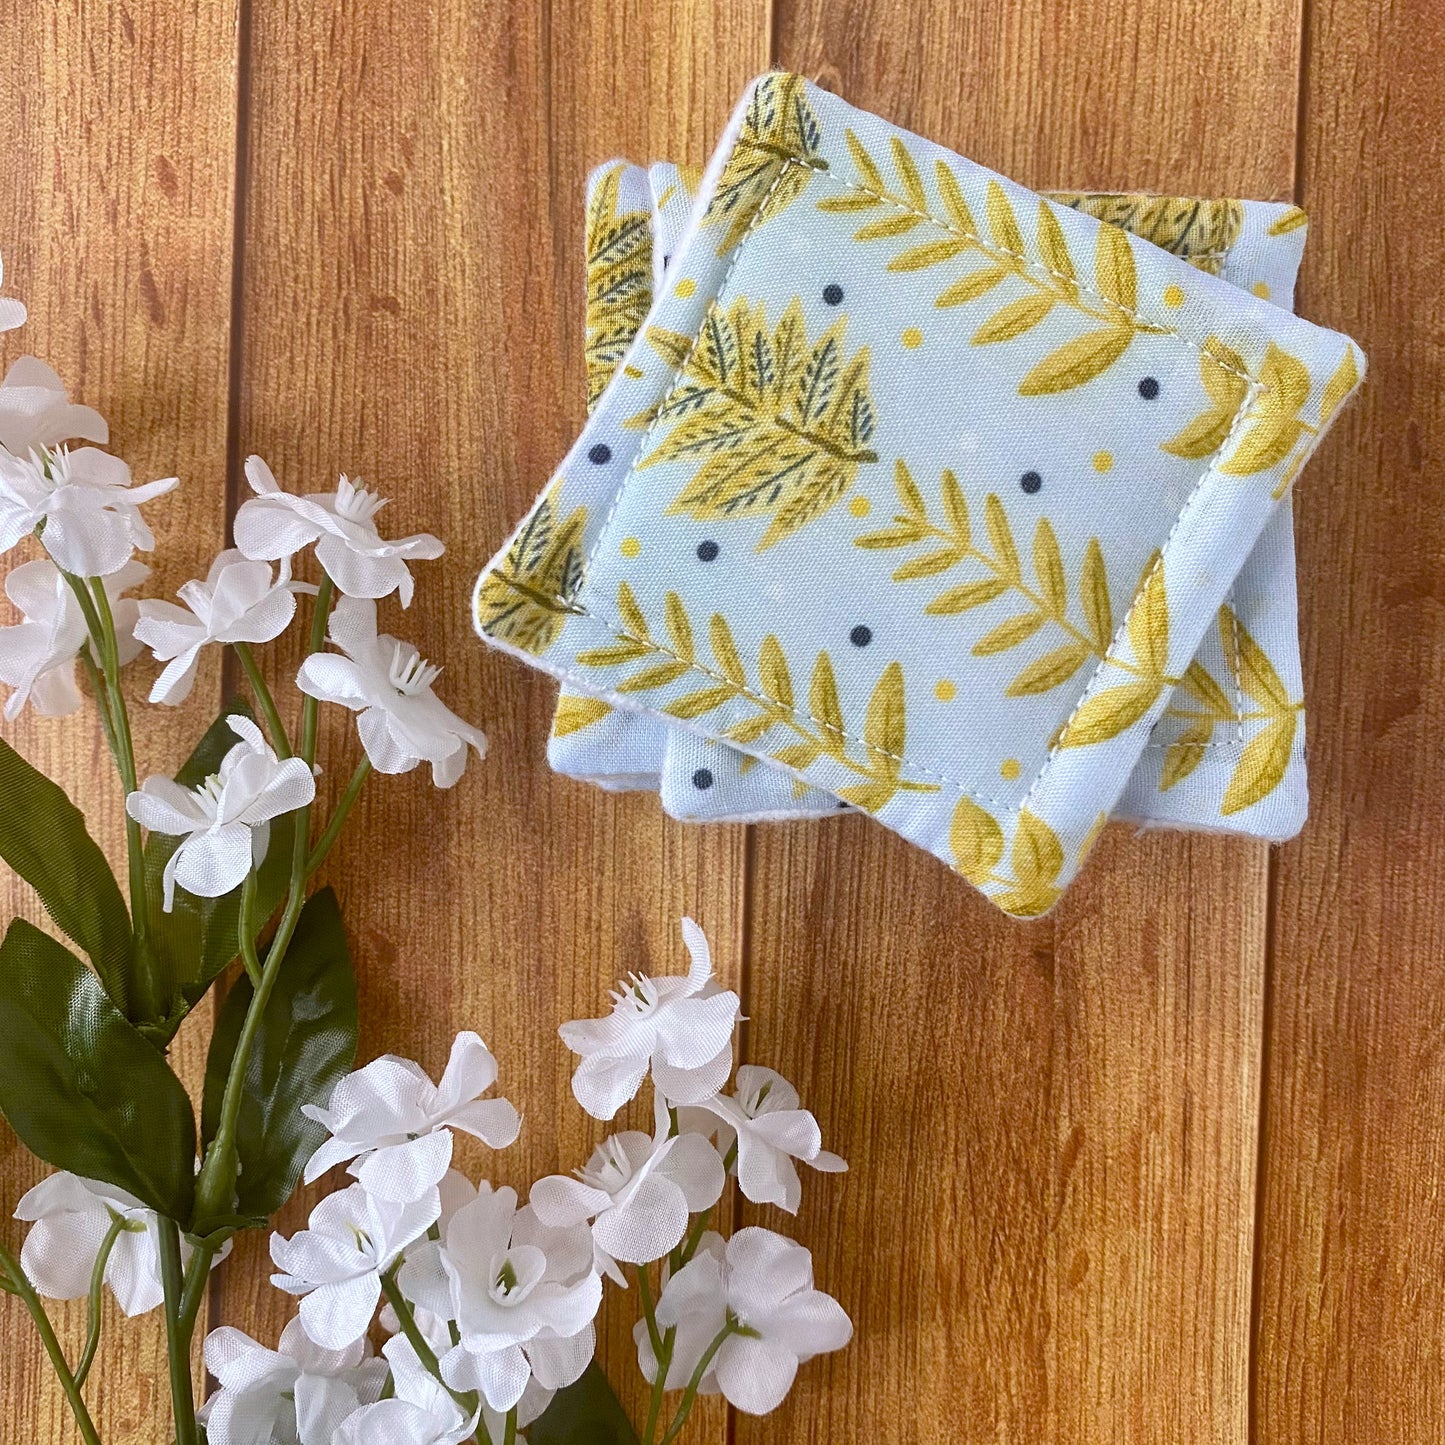 yellow foliage patterned reusable skincare pads in a stack next to some flowers, all on a wooden background